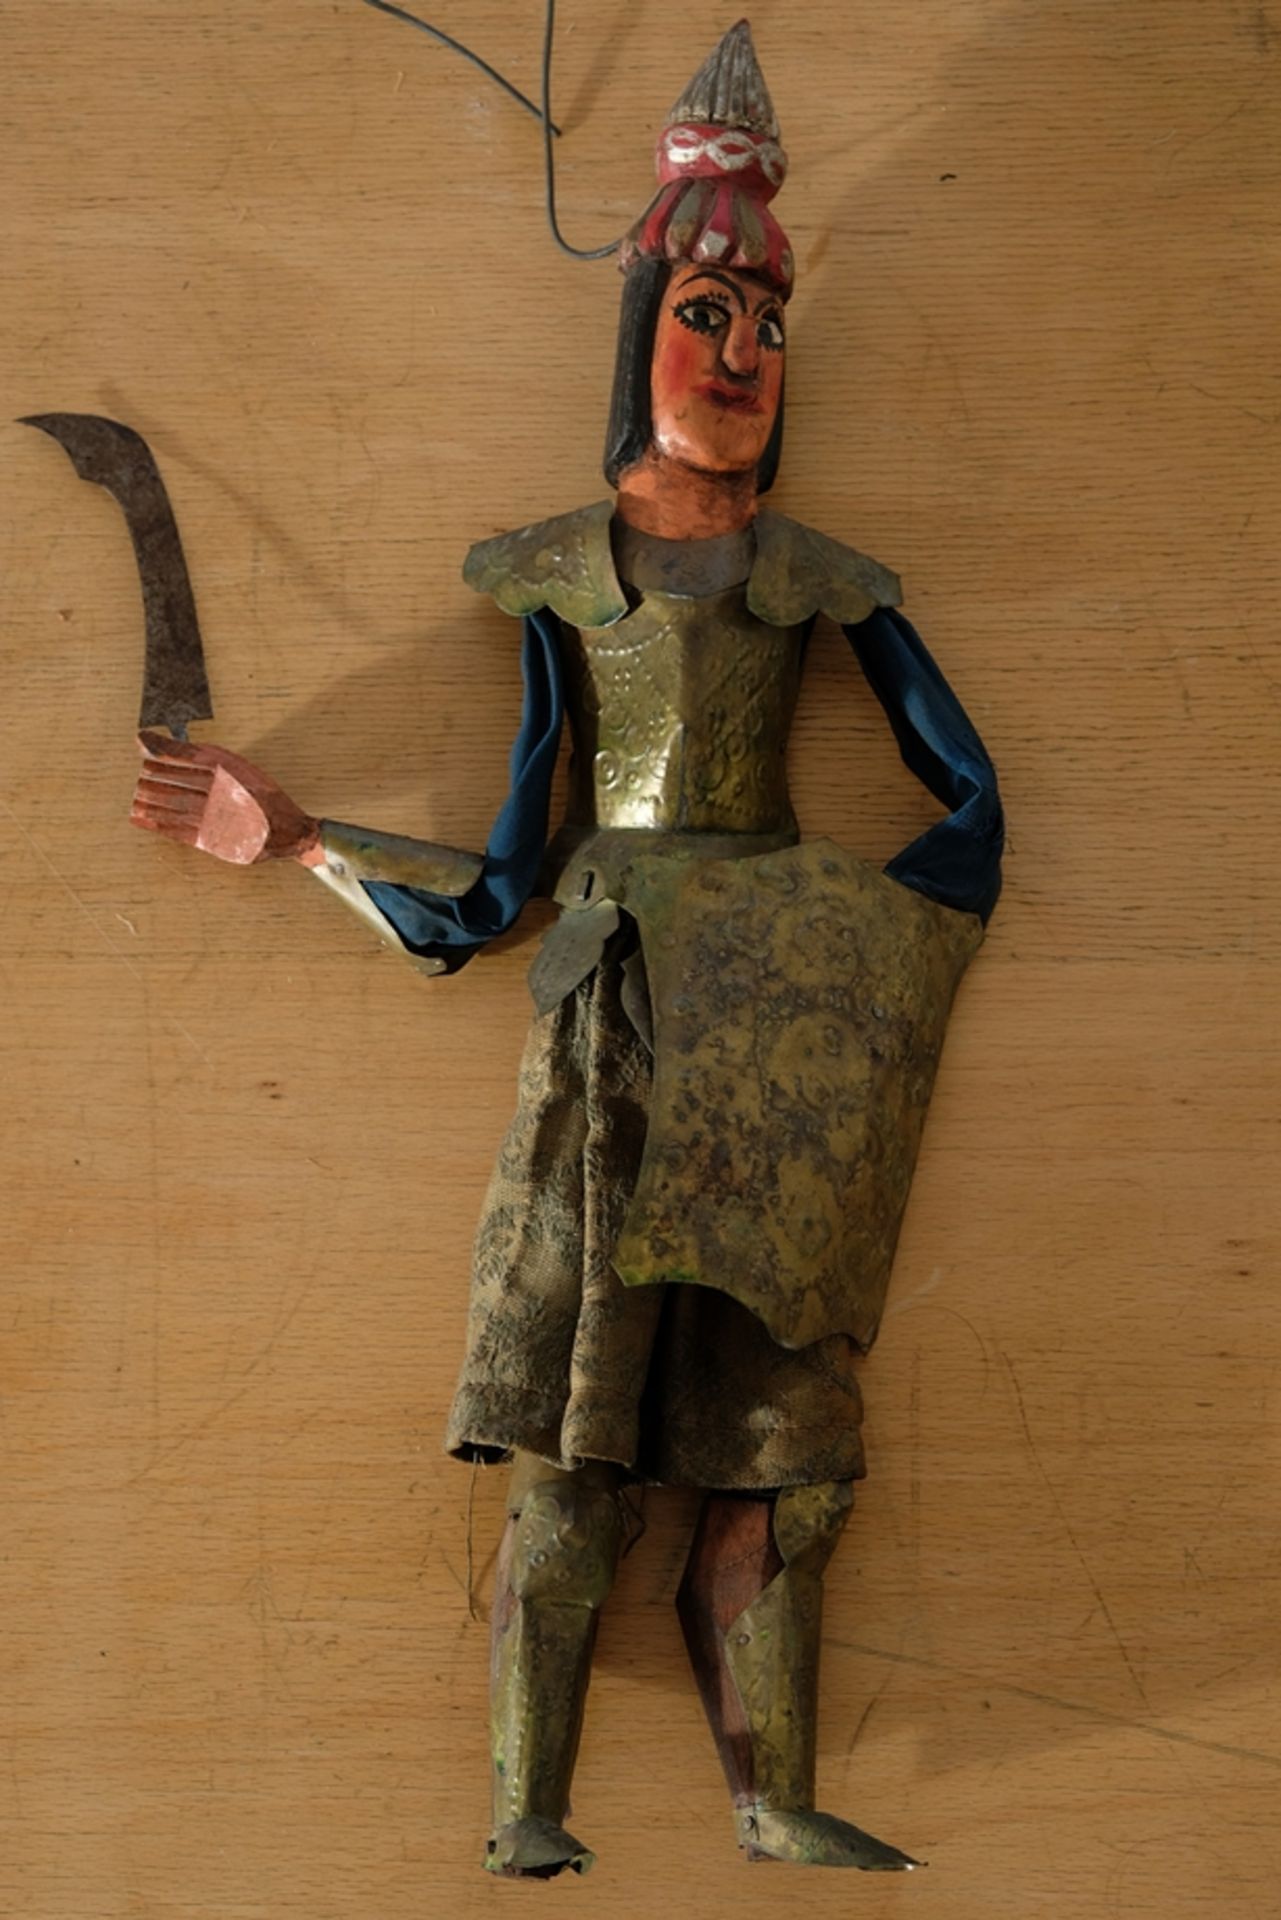 Theatre puppet Warrior probably marionette without strings